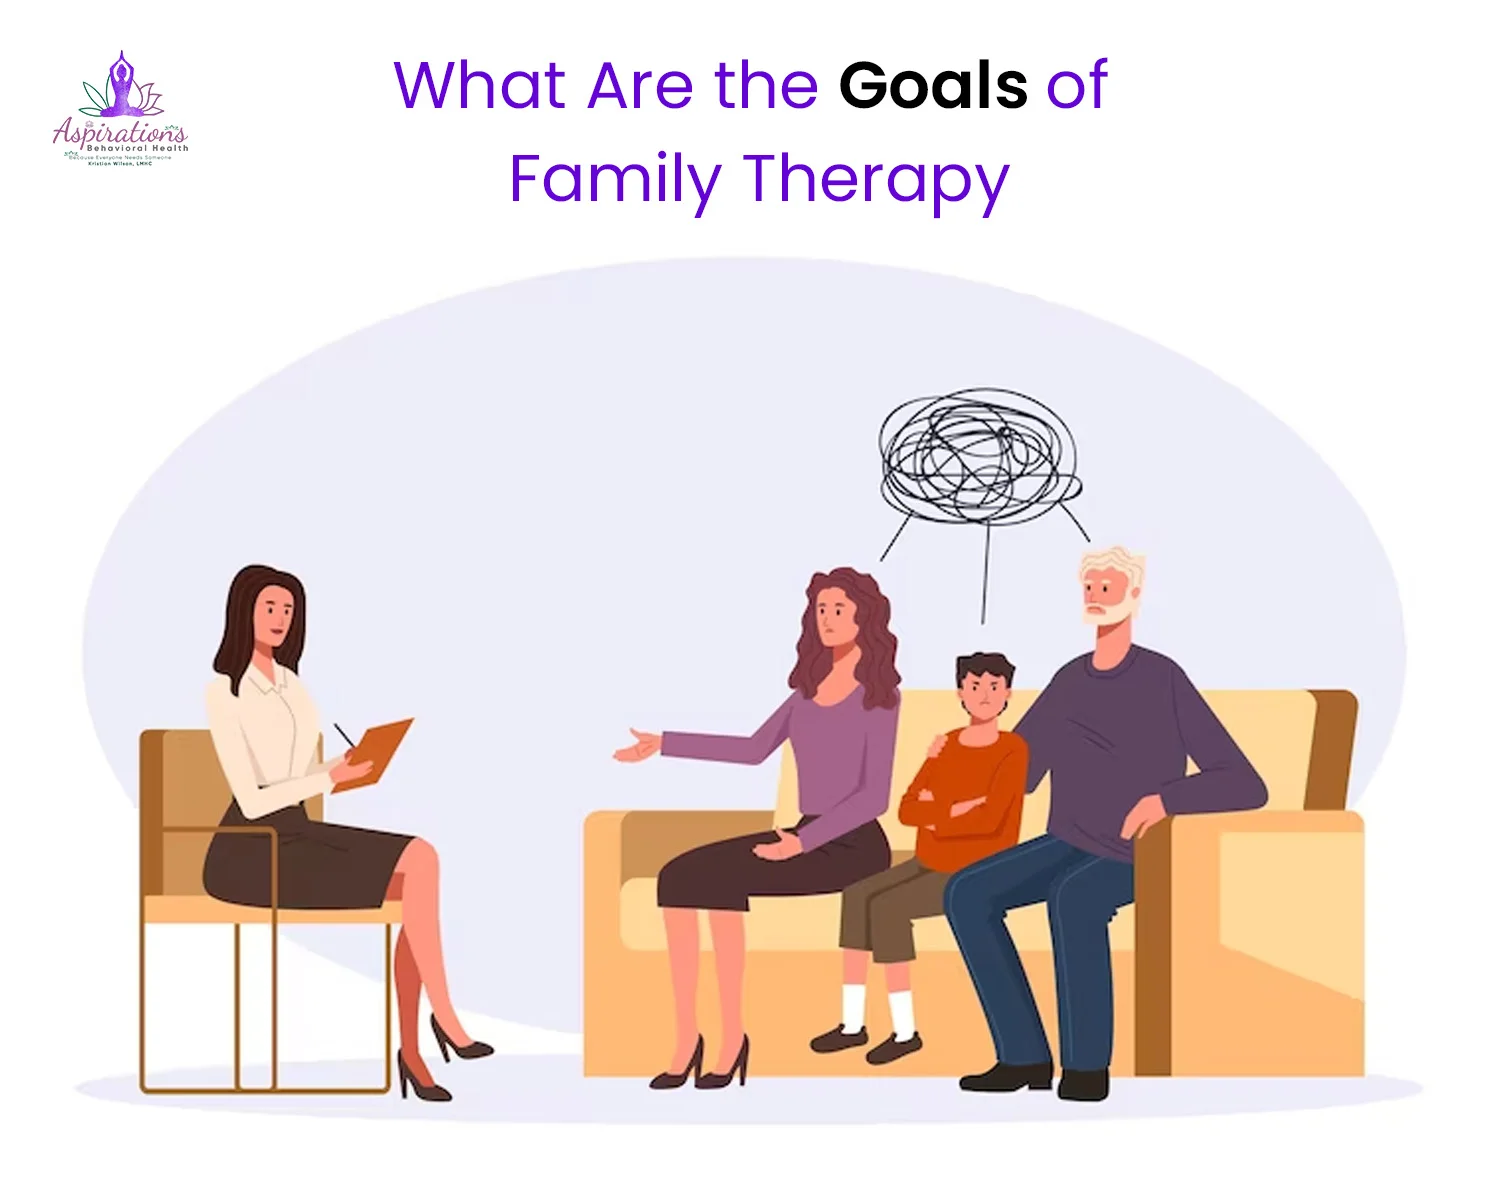 What Are the Goals of Family Therapy?